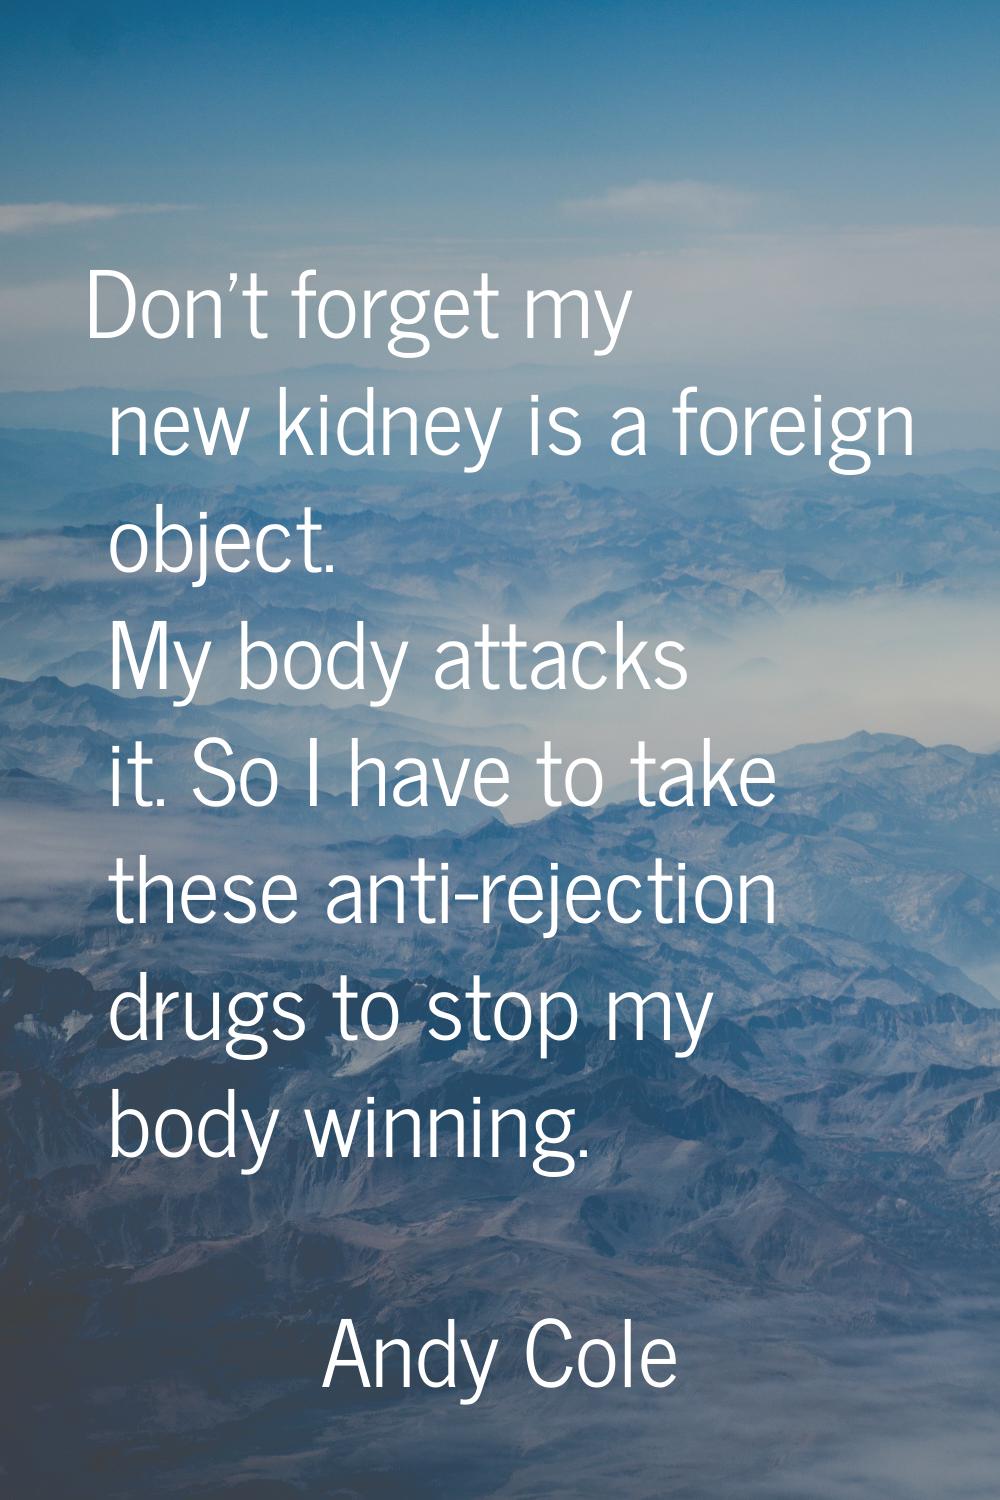 Don't forget my new kidney is a foreign object. My body attacks it. So I have to take these anti-re